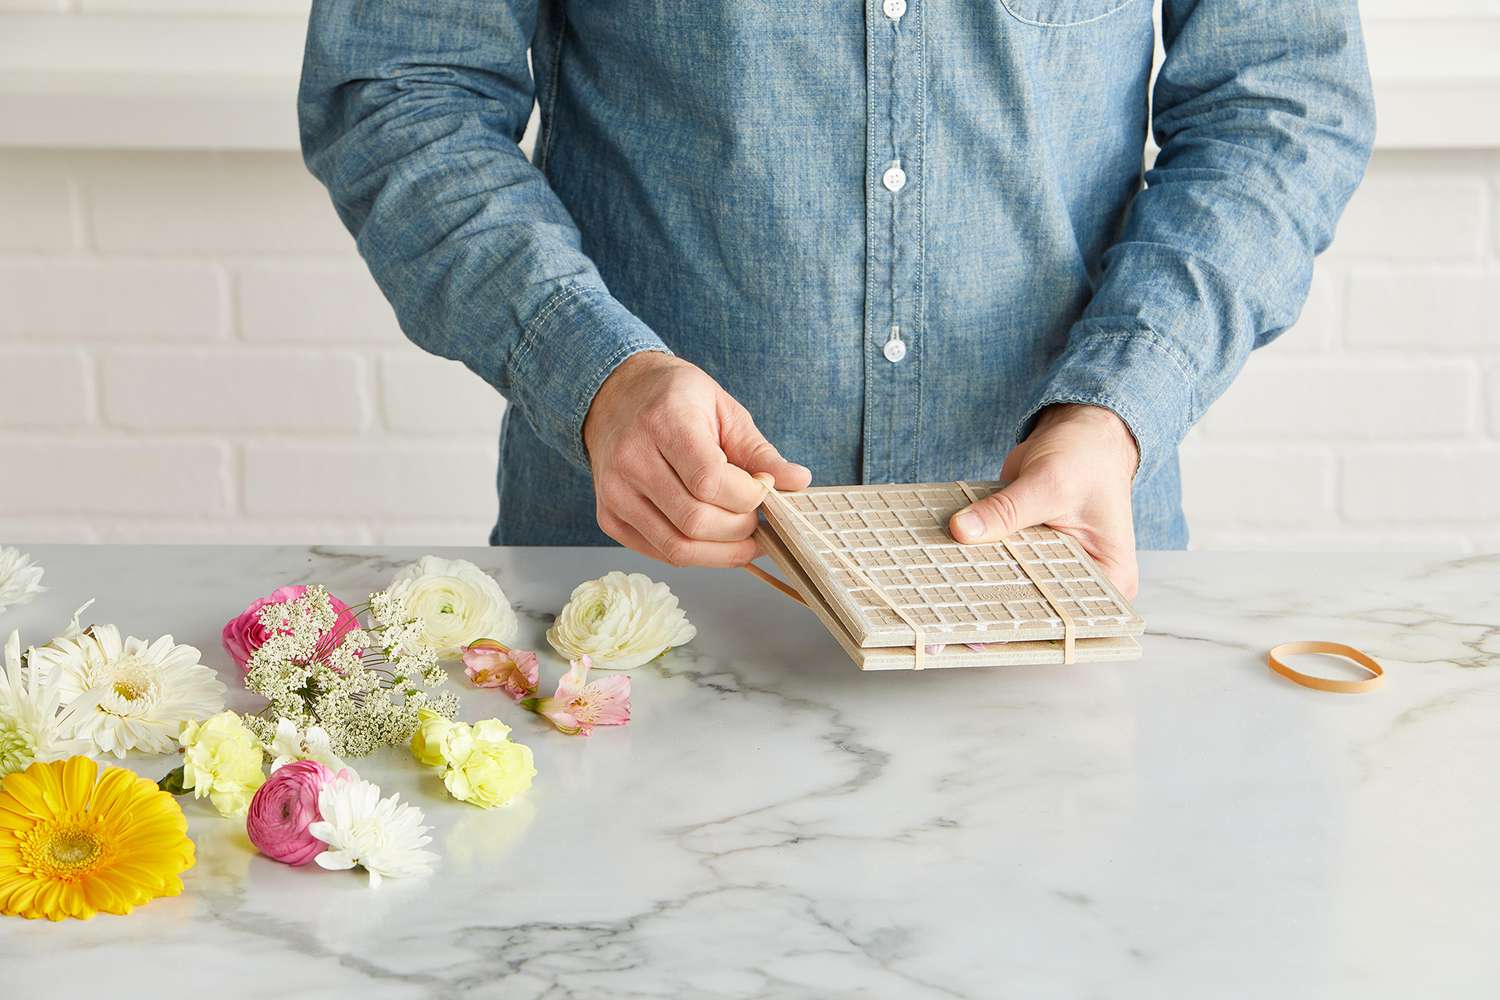 rubber bands rapped around tile squares to press flowers